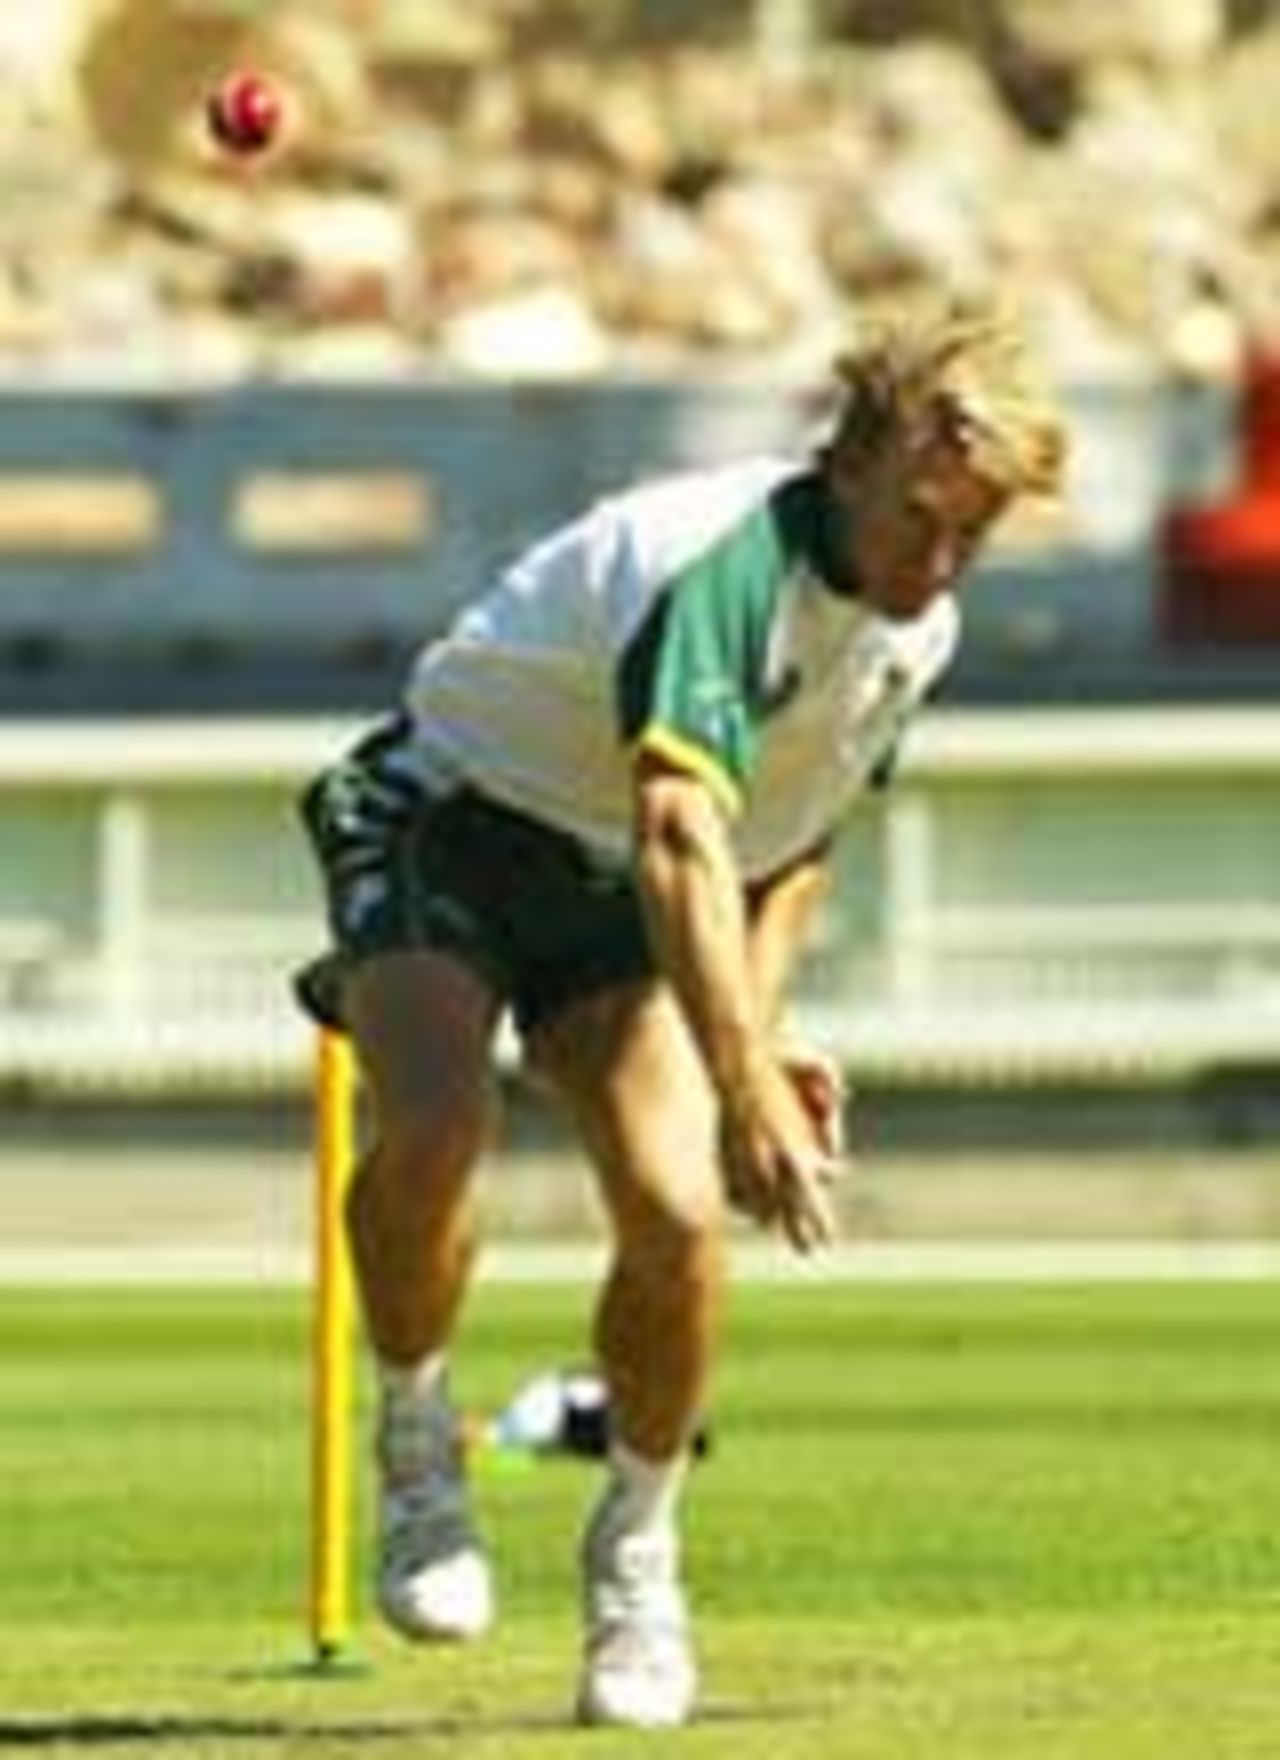 Andy Bichel in action during training, Melbourne, December 25, 2003